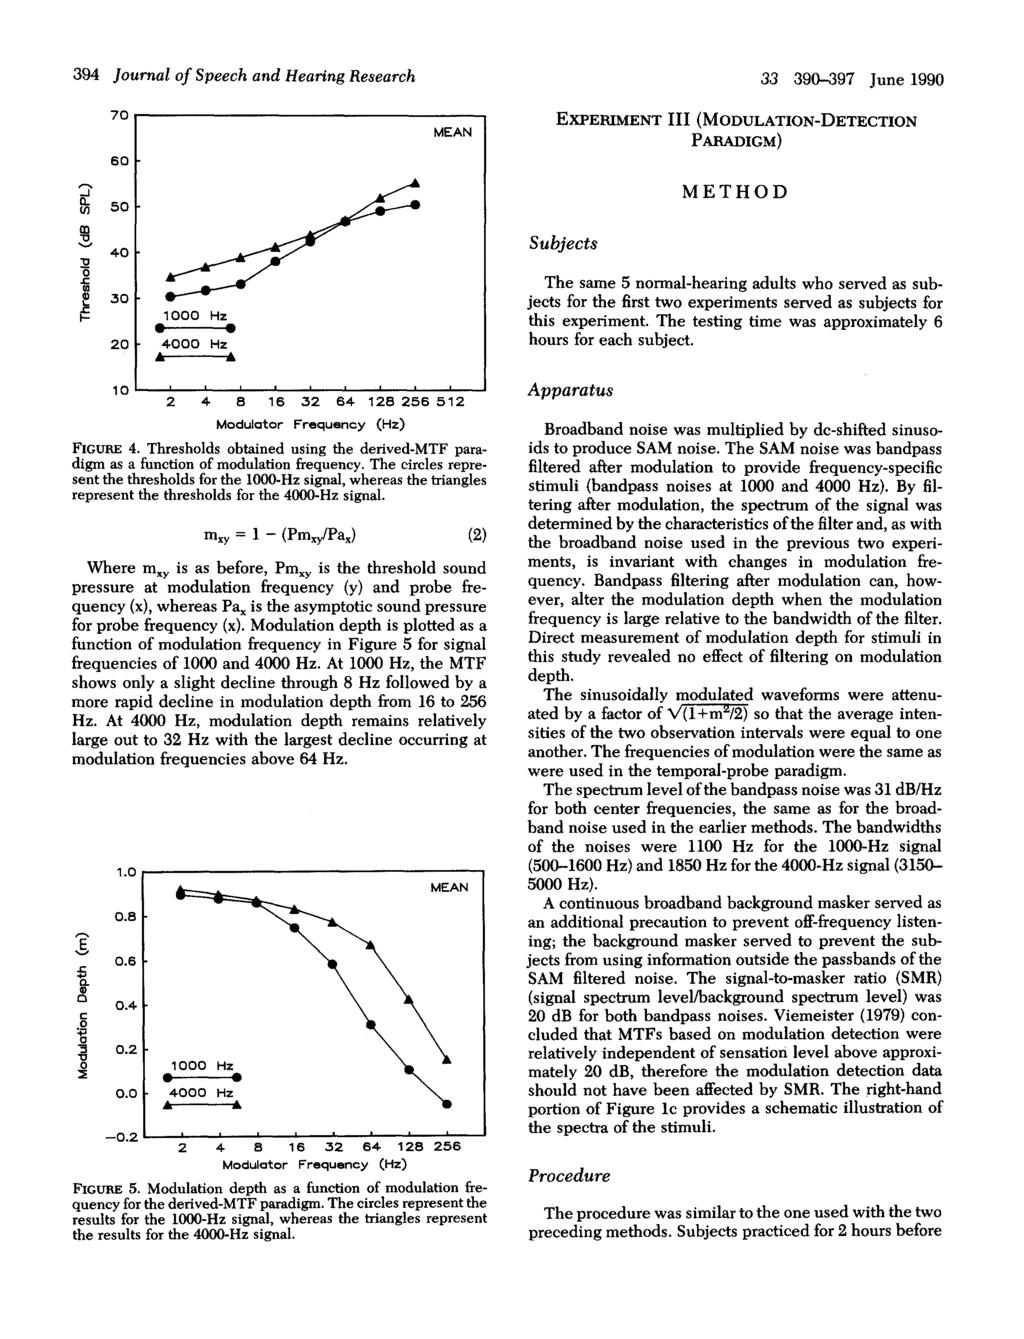 394 Journal of Speech and Hearing Research 33 390-397 June 1990 0J mca 70 60 50 40 I- I- MEAN EXPERIMENT III (MODULATION-DETECTION PARADIGM) Subjects METHOD 'a 0 -C f- 30 20 I- 1000 Hz 4000 Hz A----